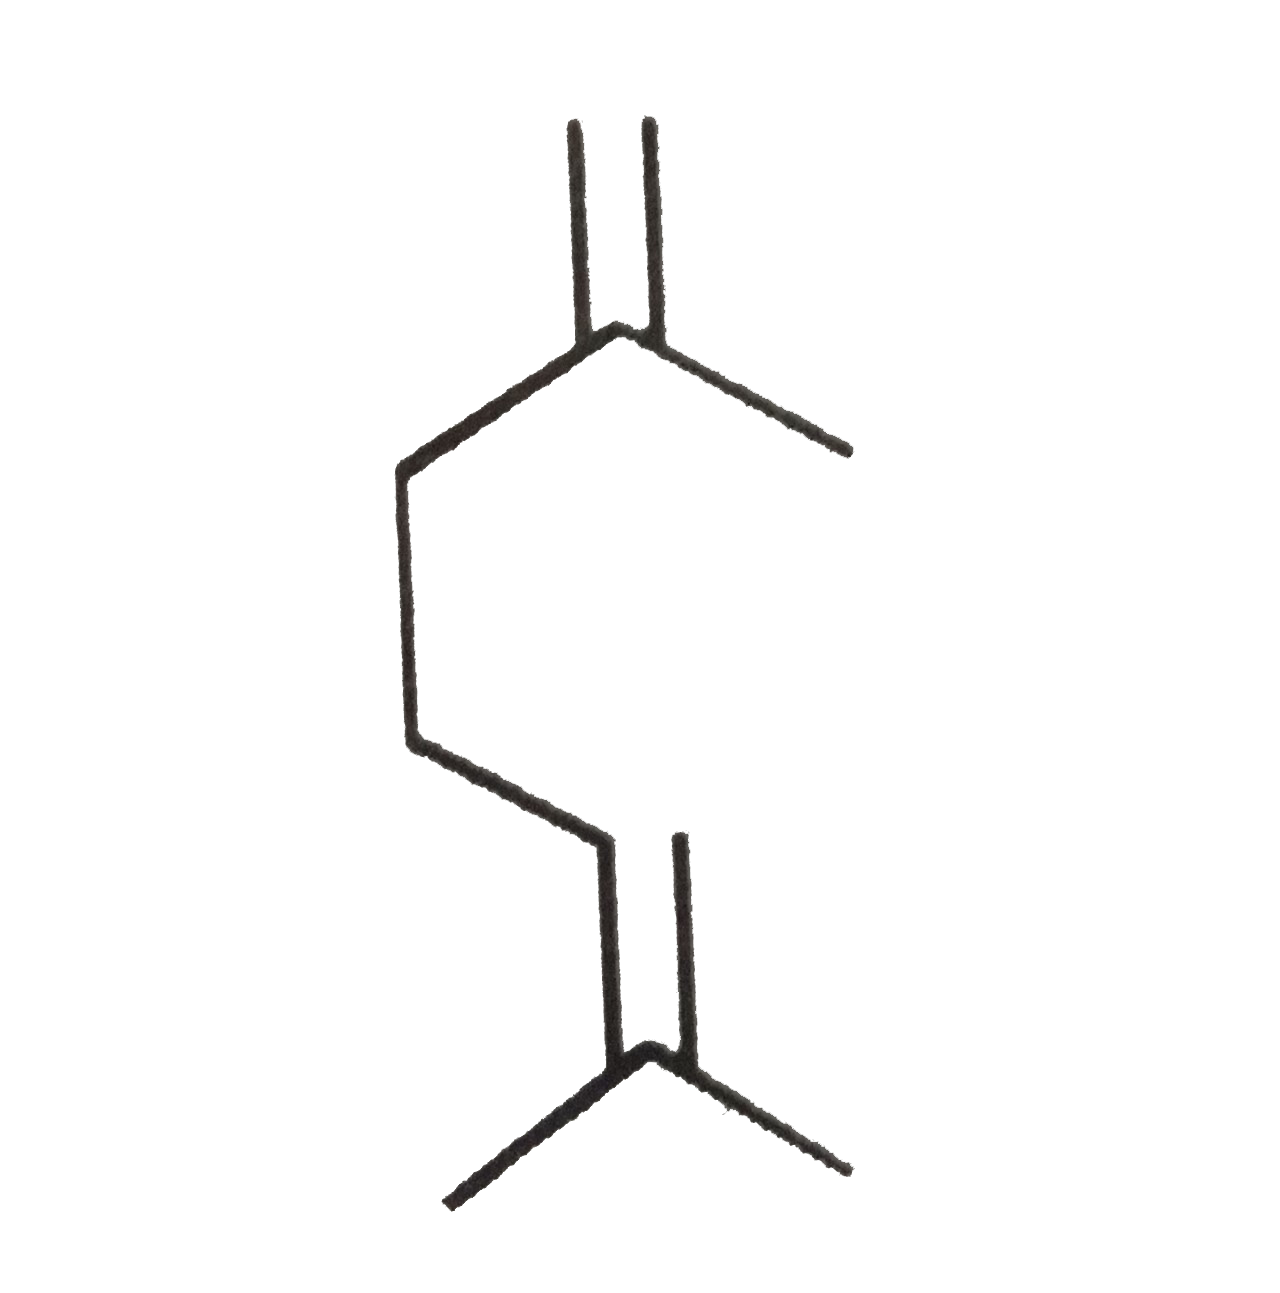 The correct IUPAC name for the following compound